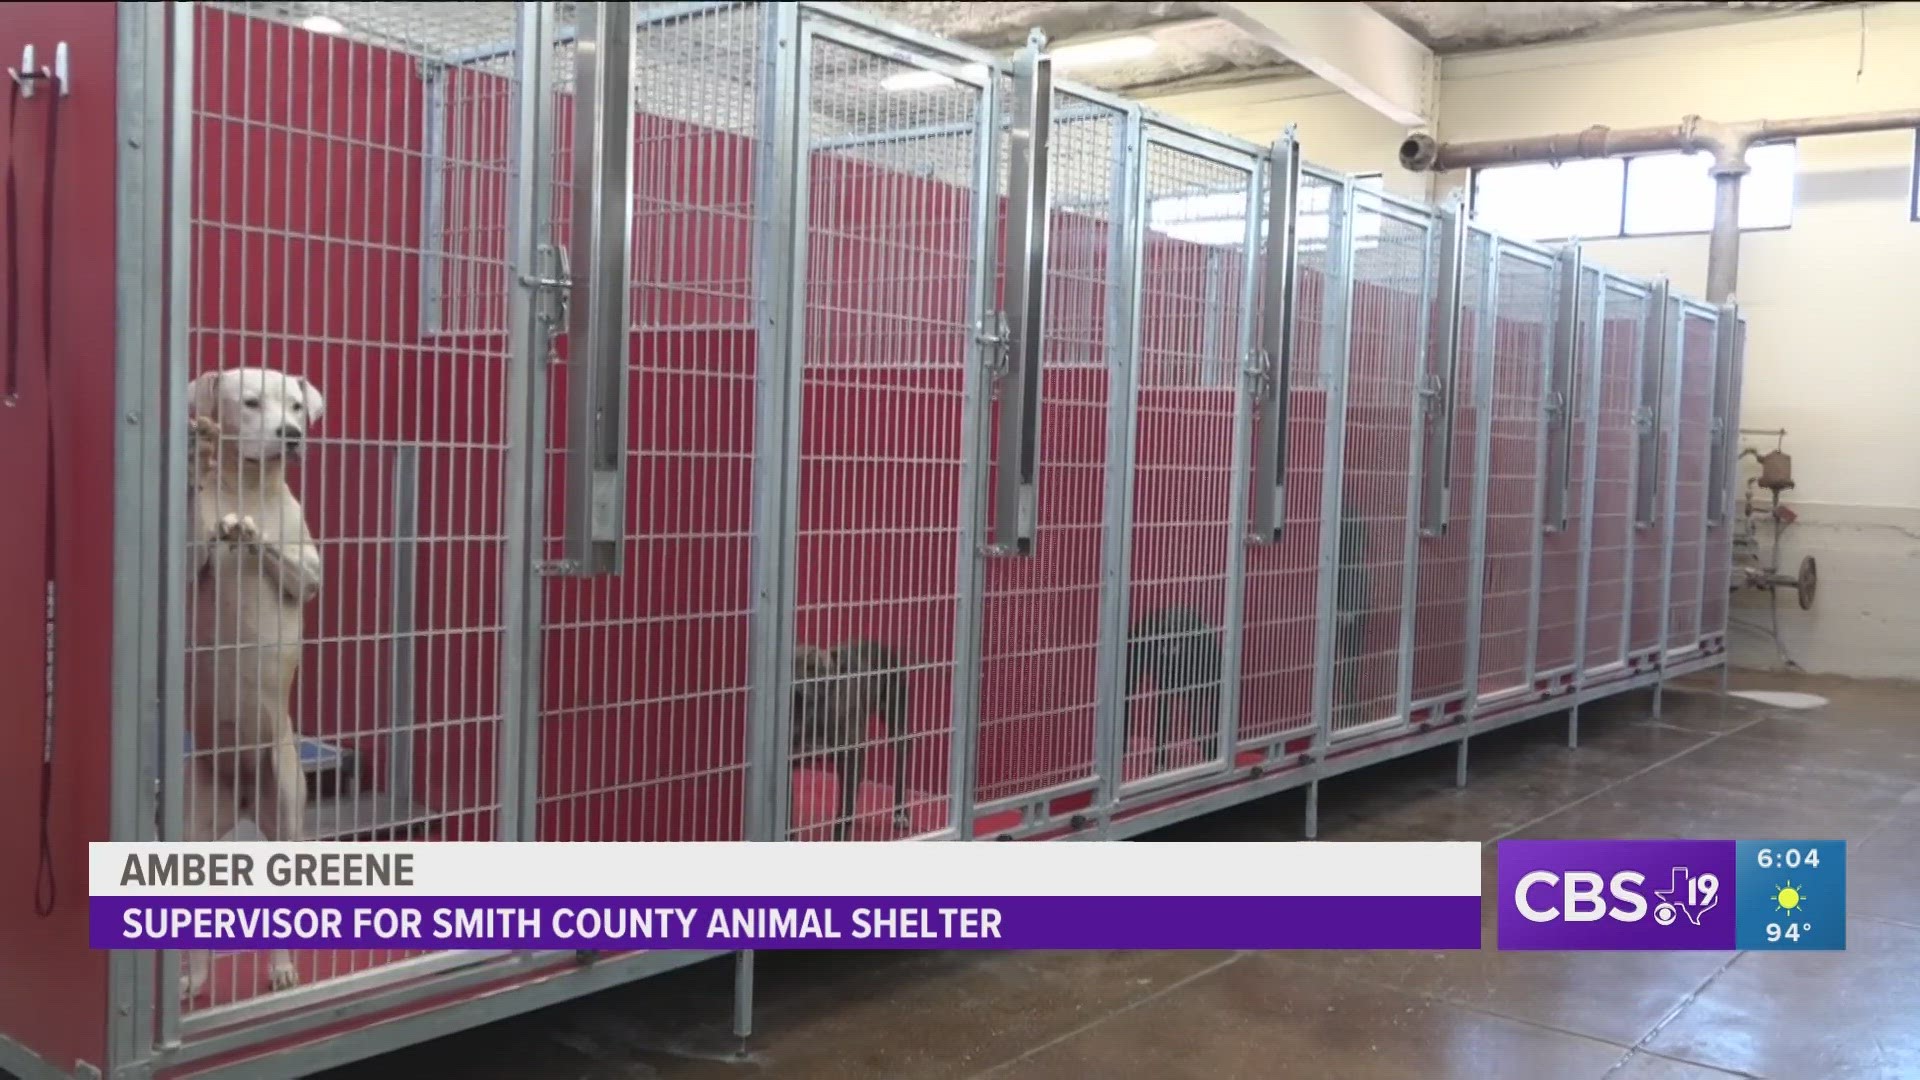 Smith County Animal Control supervisor Amber Greene said in her 13 years working with the shelter,  the population of dogs is the highest she's seen.